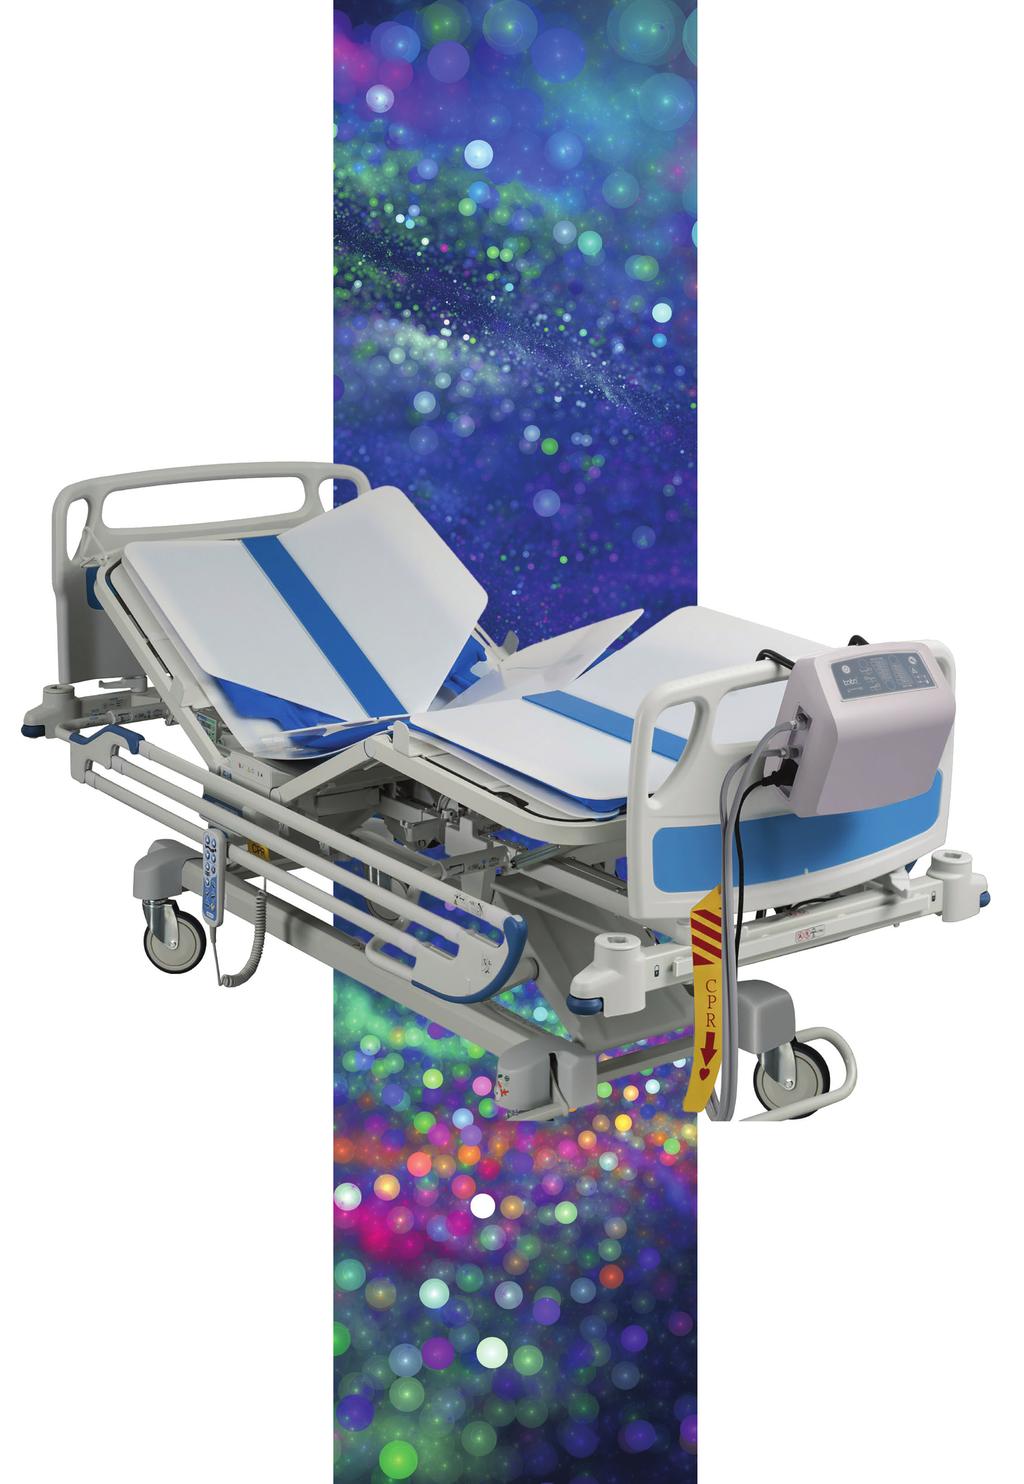 Upper body zone can profile individually to accommodate fixed backrests or positioning equipment Inflatable air cells